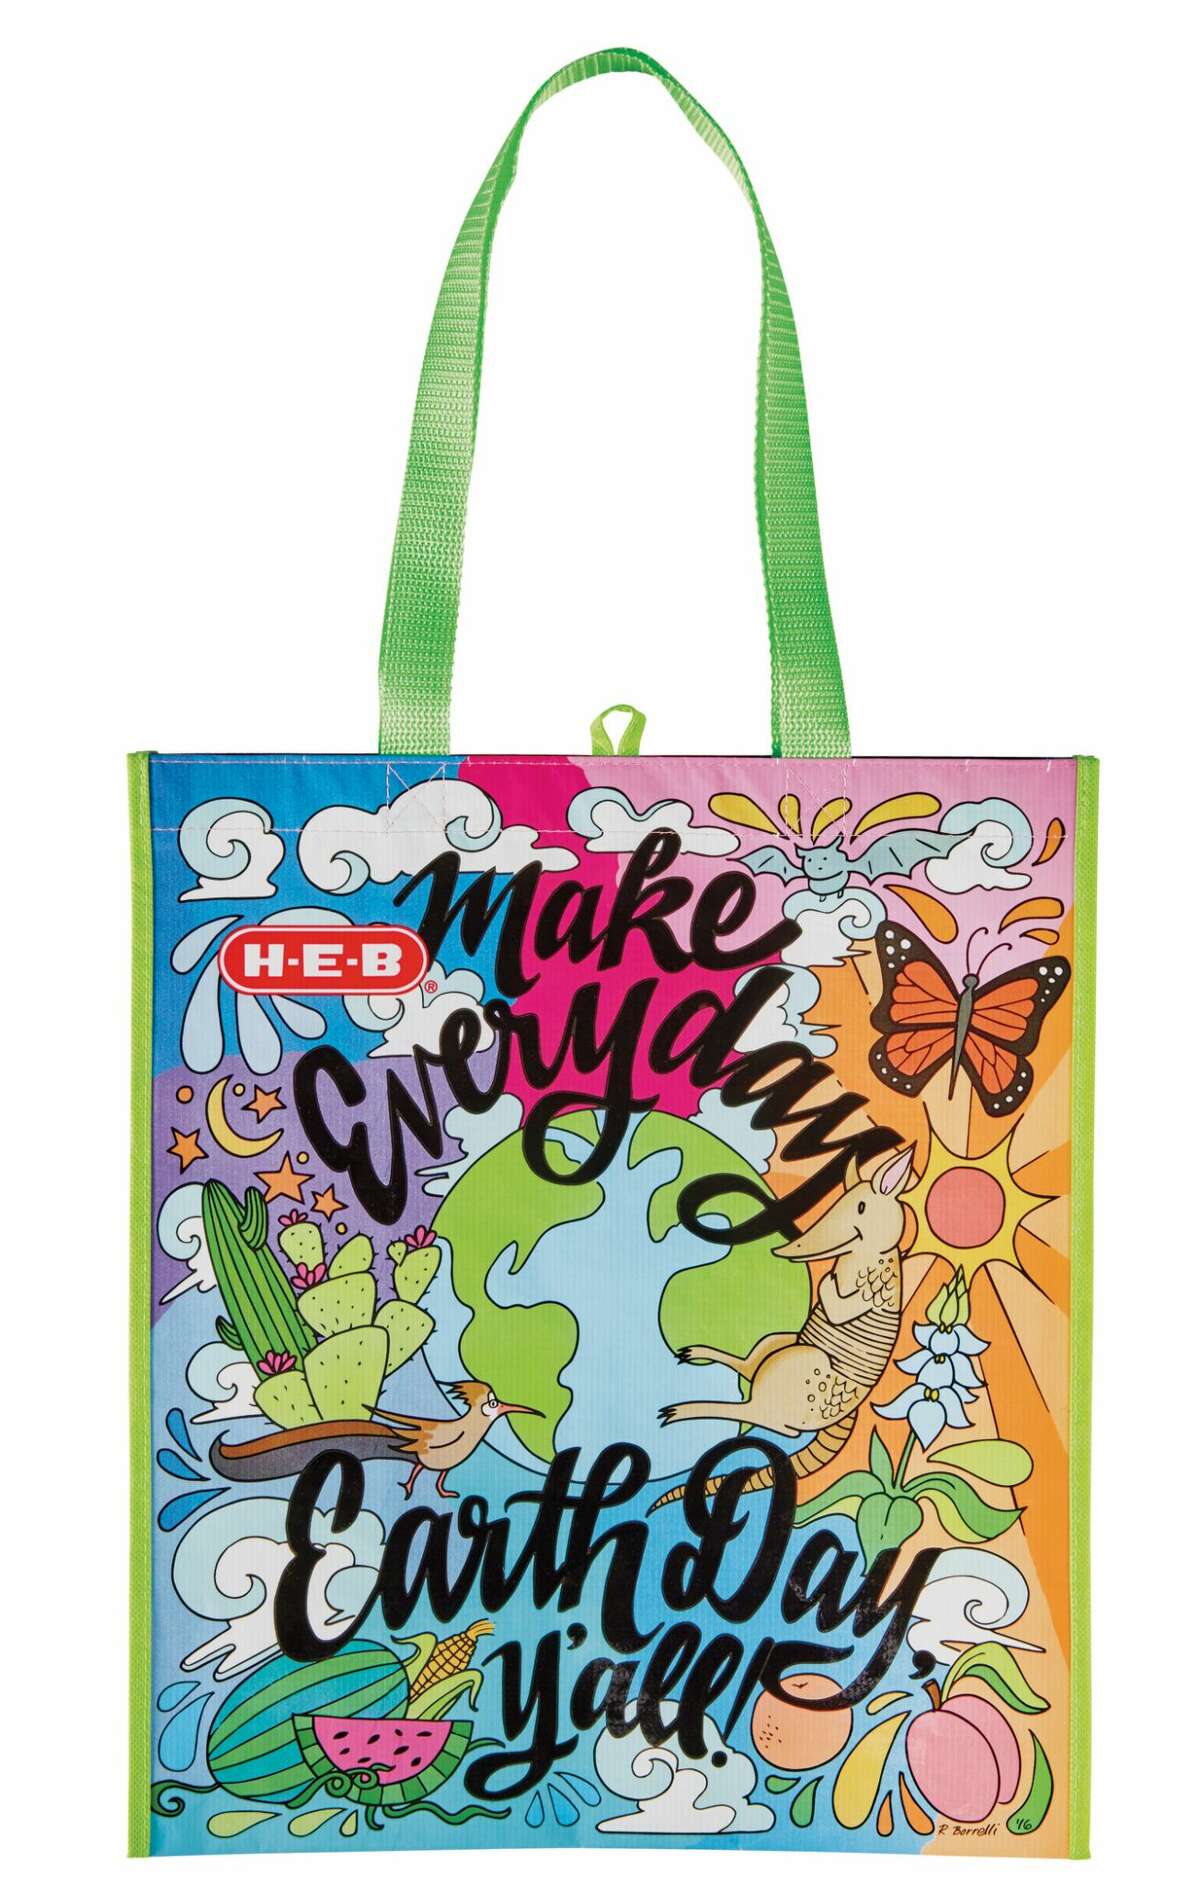 H-E-B to give away free bags on Earth Day